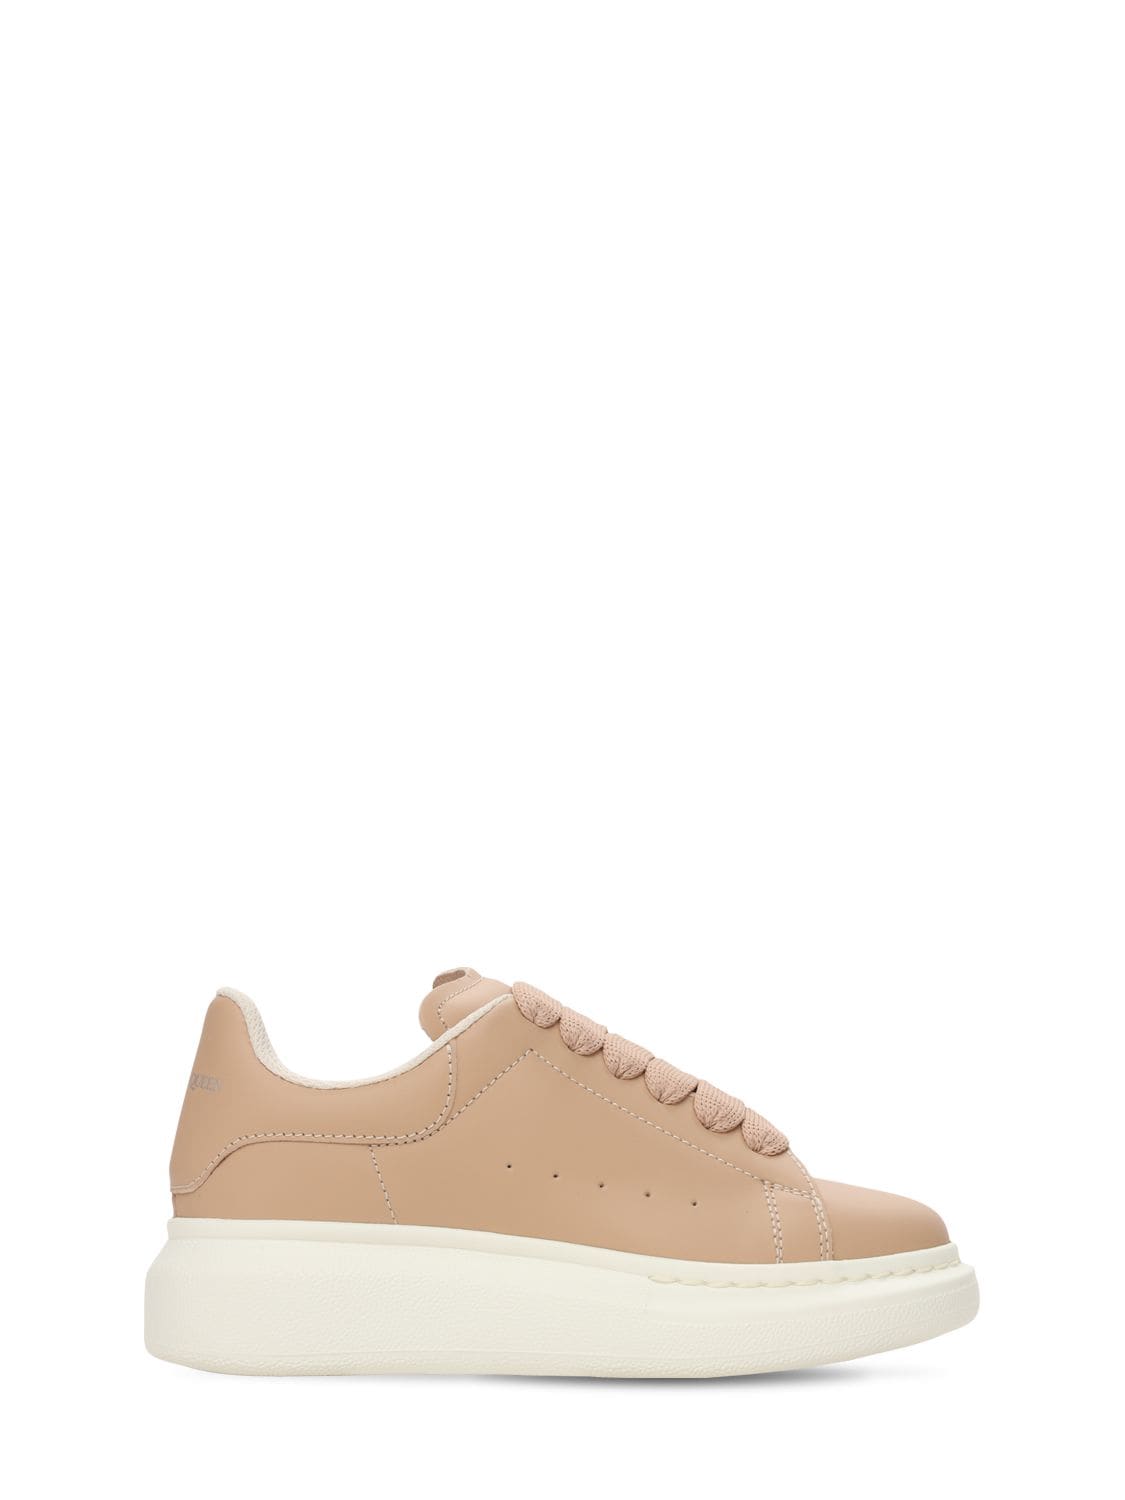 ALEXANDER MCQUEEN LEATHER LACE-UP SNEAKERS,73ILXS012-NJGWOQ2